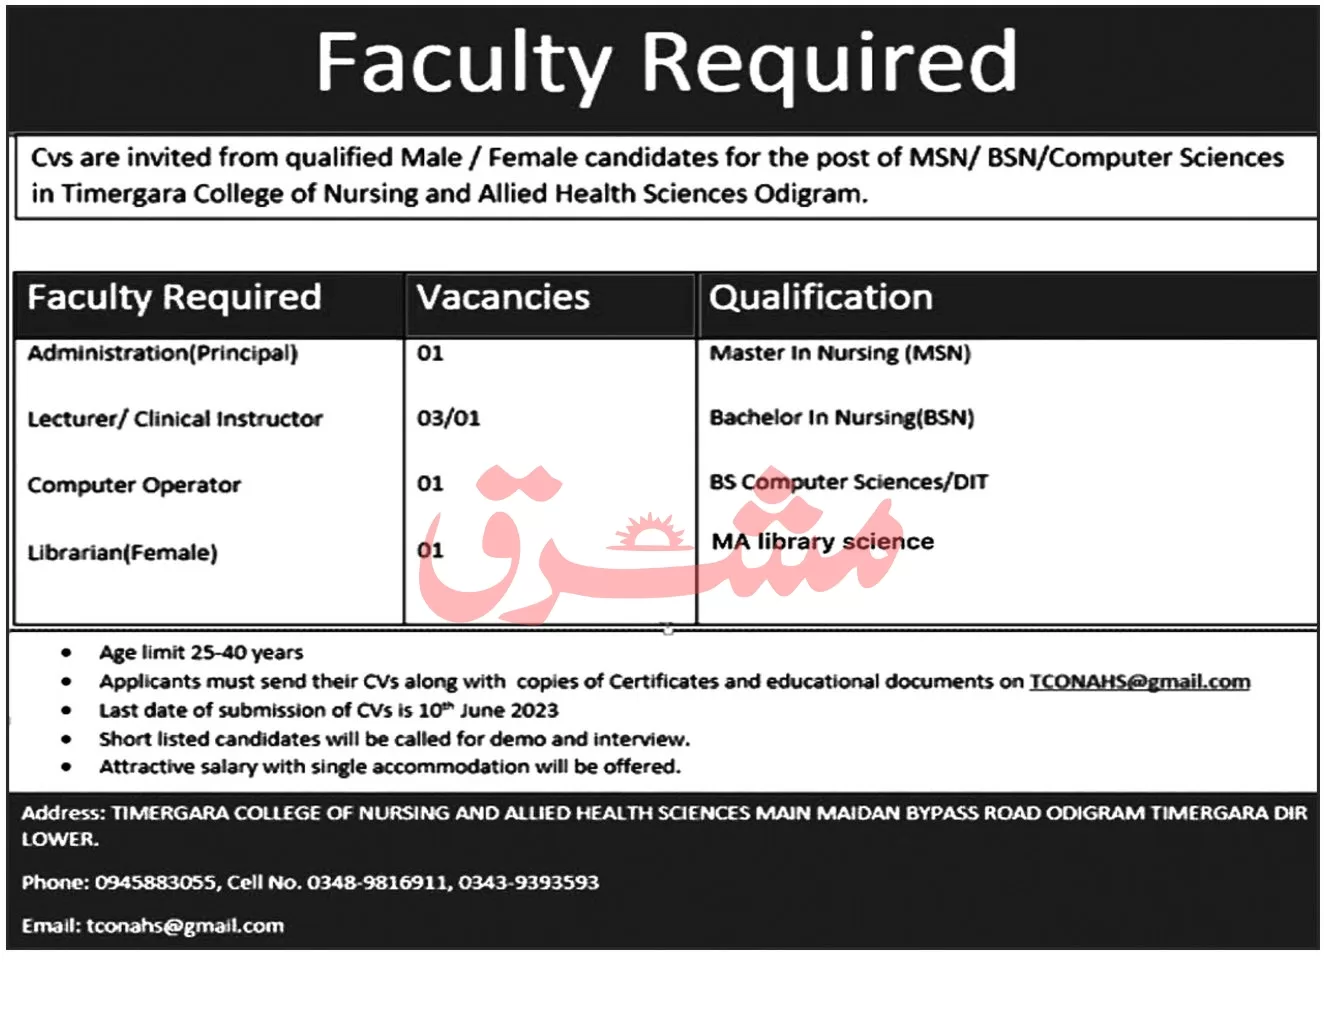 Timergara College of Nursing & Health Sciences Announces Job OpeningsTimergara College of Nursing & Health Sciences, located in Lower Dir, Khyber Pakhtunkhwa (KPK), Pakistan, has published a job advertisement in the daily Mashriq Newspaper on May 31, 2023. The college is inviting applications for various vacant positions, including:

Principal
Female Librarian
Clinical Instructor
Lecturer
Computer Operator
Candidates interested in these positions should possess the required educational qualifications, which may include MA, BCS, Master's, Bachelor's degrees, or equivalent qualifications.

The closing date for the latest management and other private job opportunities at Timergara College of Nursing & Health Sciences is approximately June 30, 2023 (exact date to be confirmed from the advertisement). To learn more about how to apply for these job opportunities at the college, please refer to the complete advertisement available online.

For detailed information on specific job requirements, application procedures, and other relevant details, it is recommended to review the complete advertisement available online. Timergara College of Nursing & Health Sciences welcomes qualified individuals who are passionate about contributing to the field of nursing and health sciences.